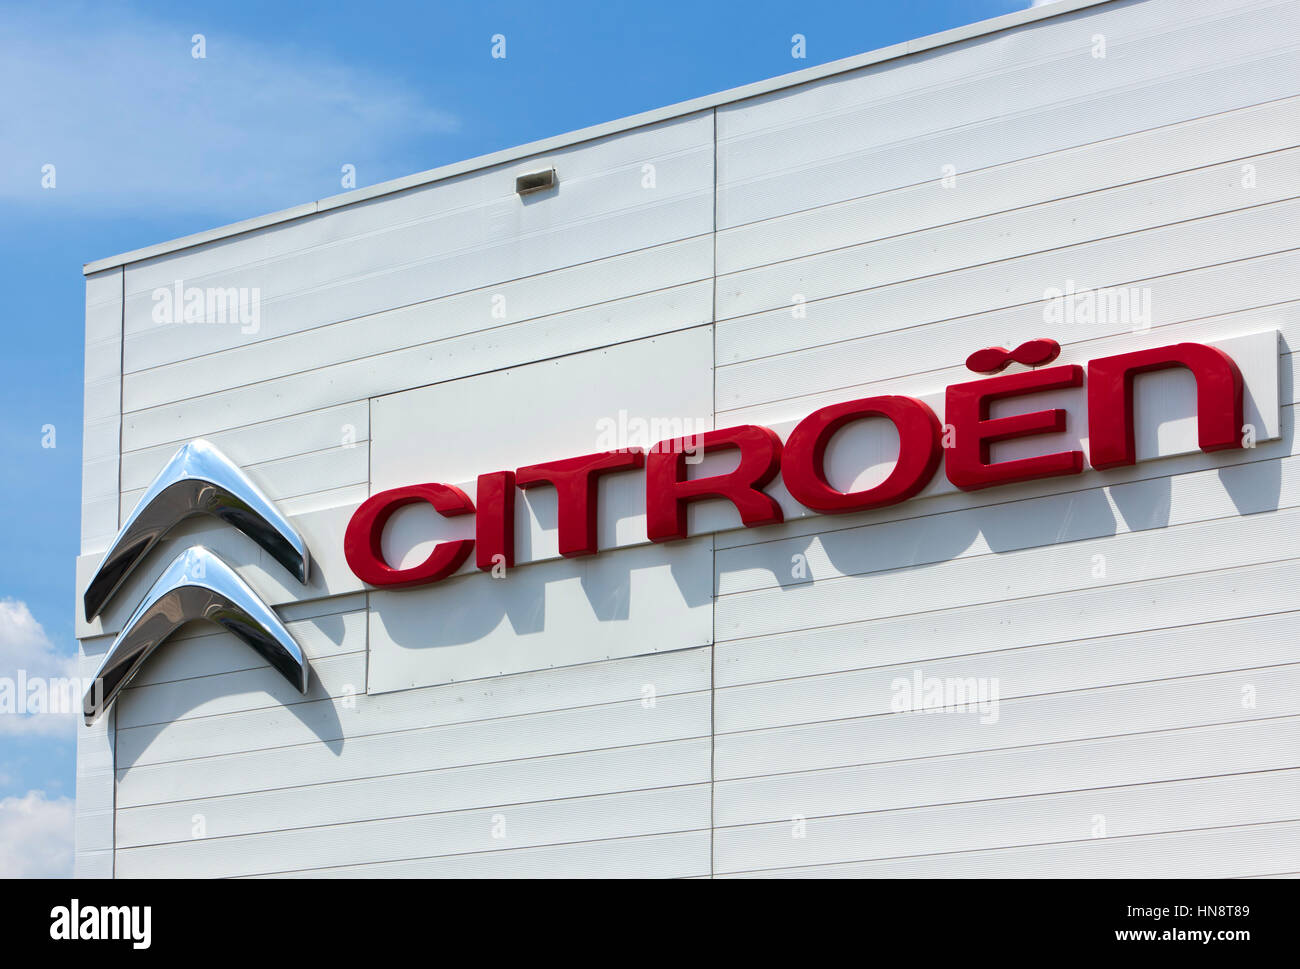 Citroen logo on the wall of car dealer's building. Citroen is a major French automobile manufacturer, part of the Stock Photo